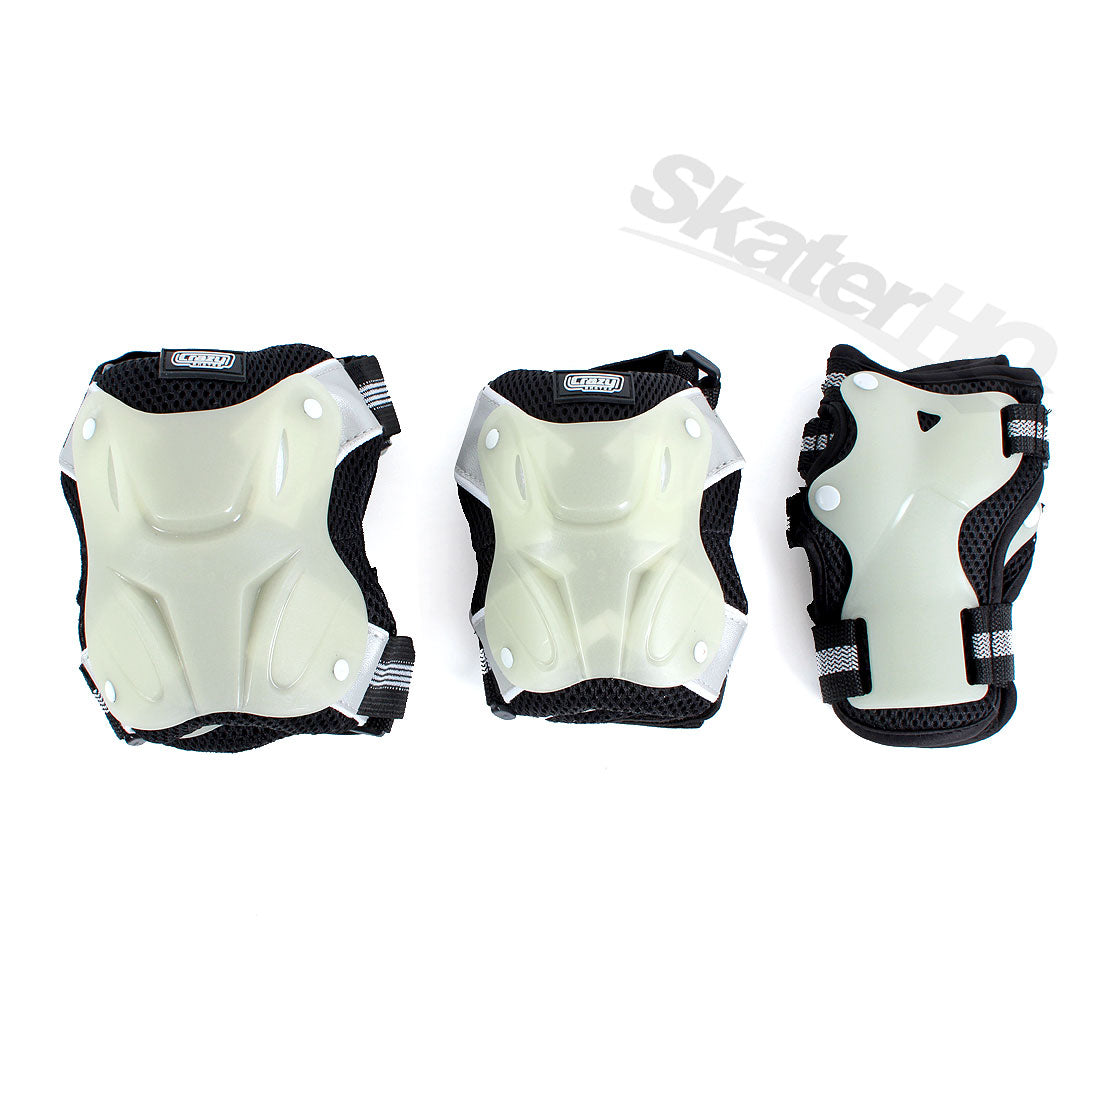 Crazy Glow Protective 3-Pack - Black - Small Protective Gear